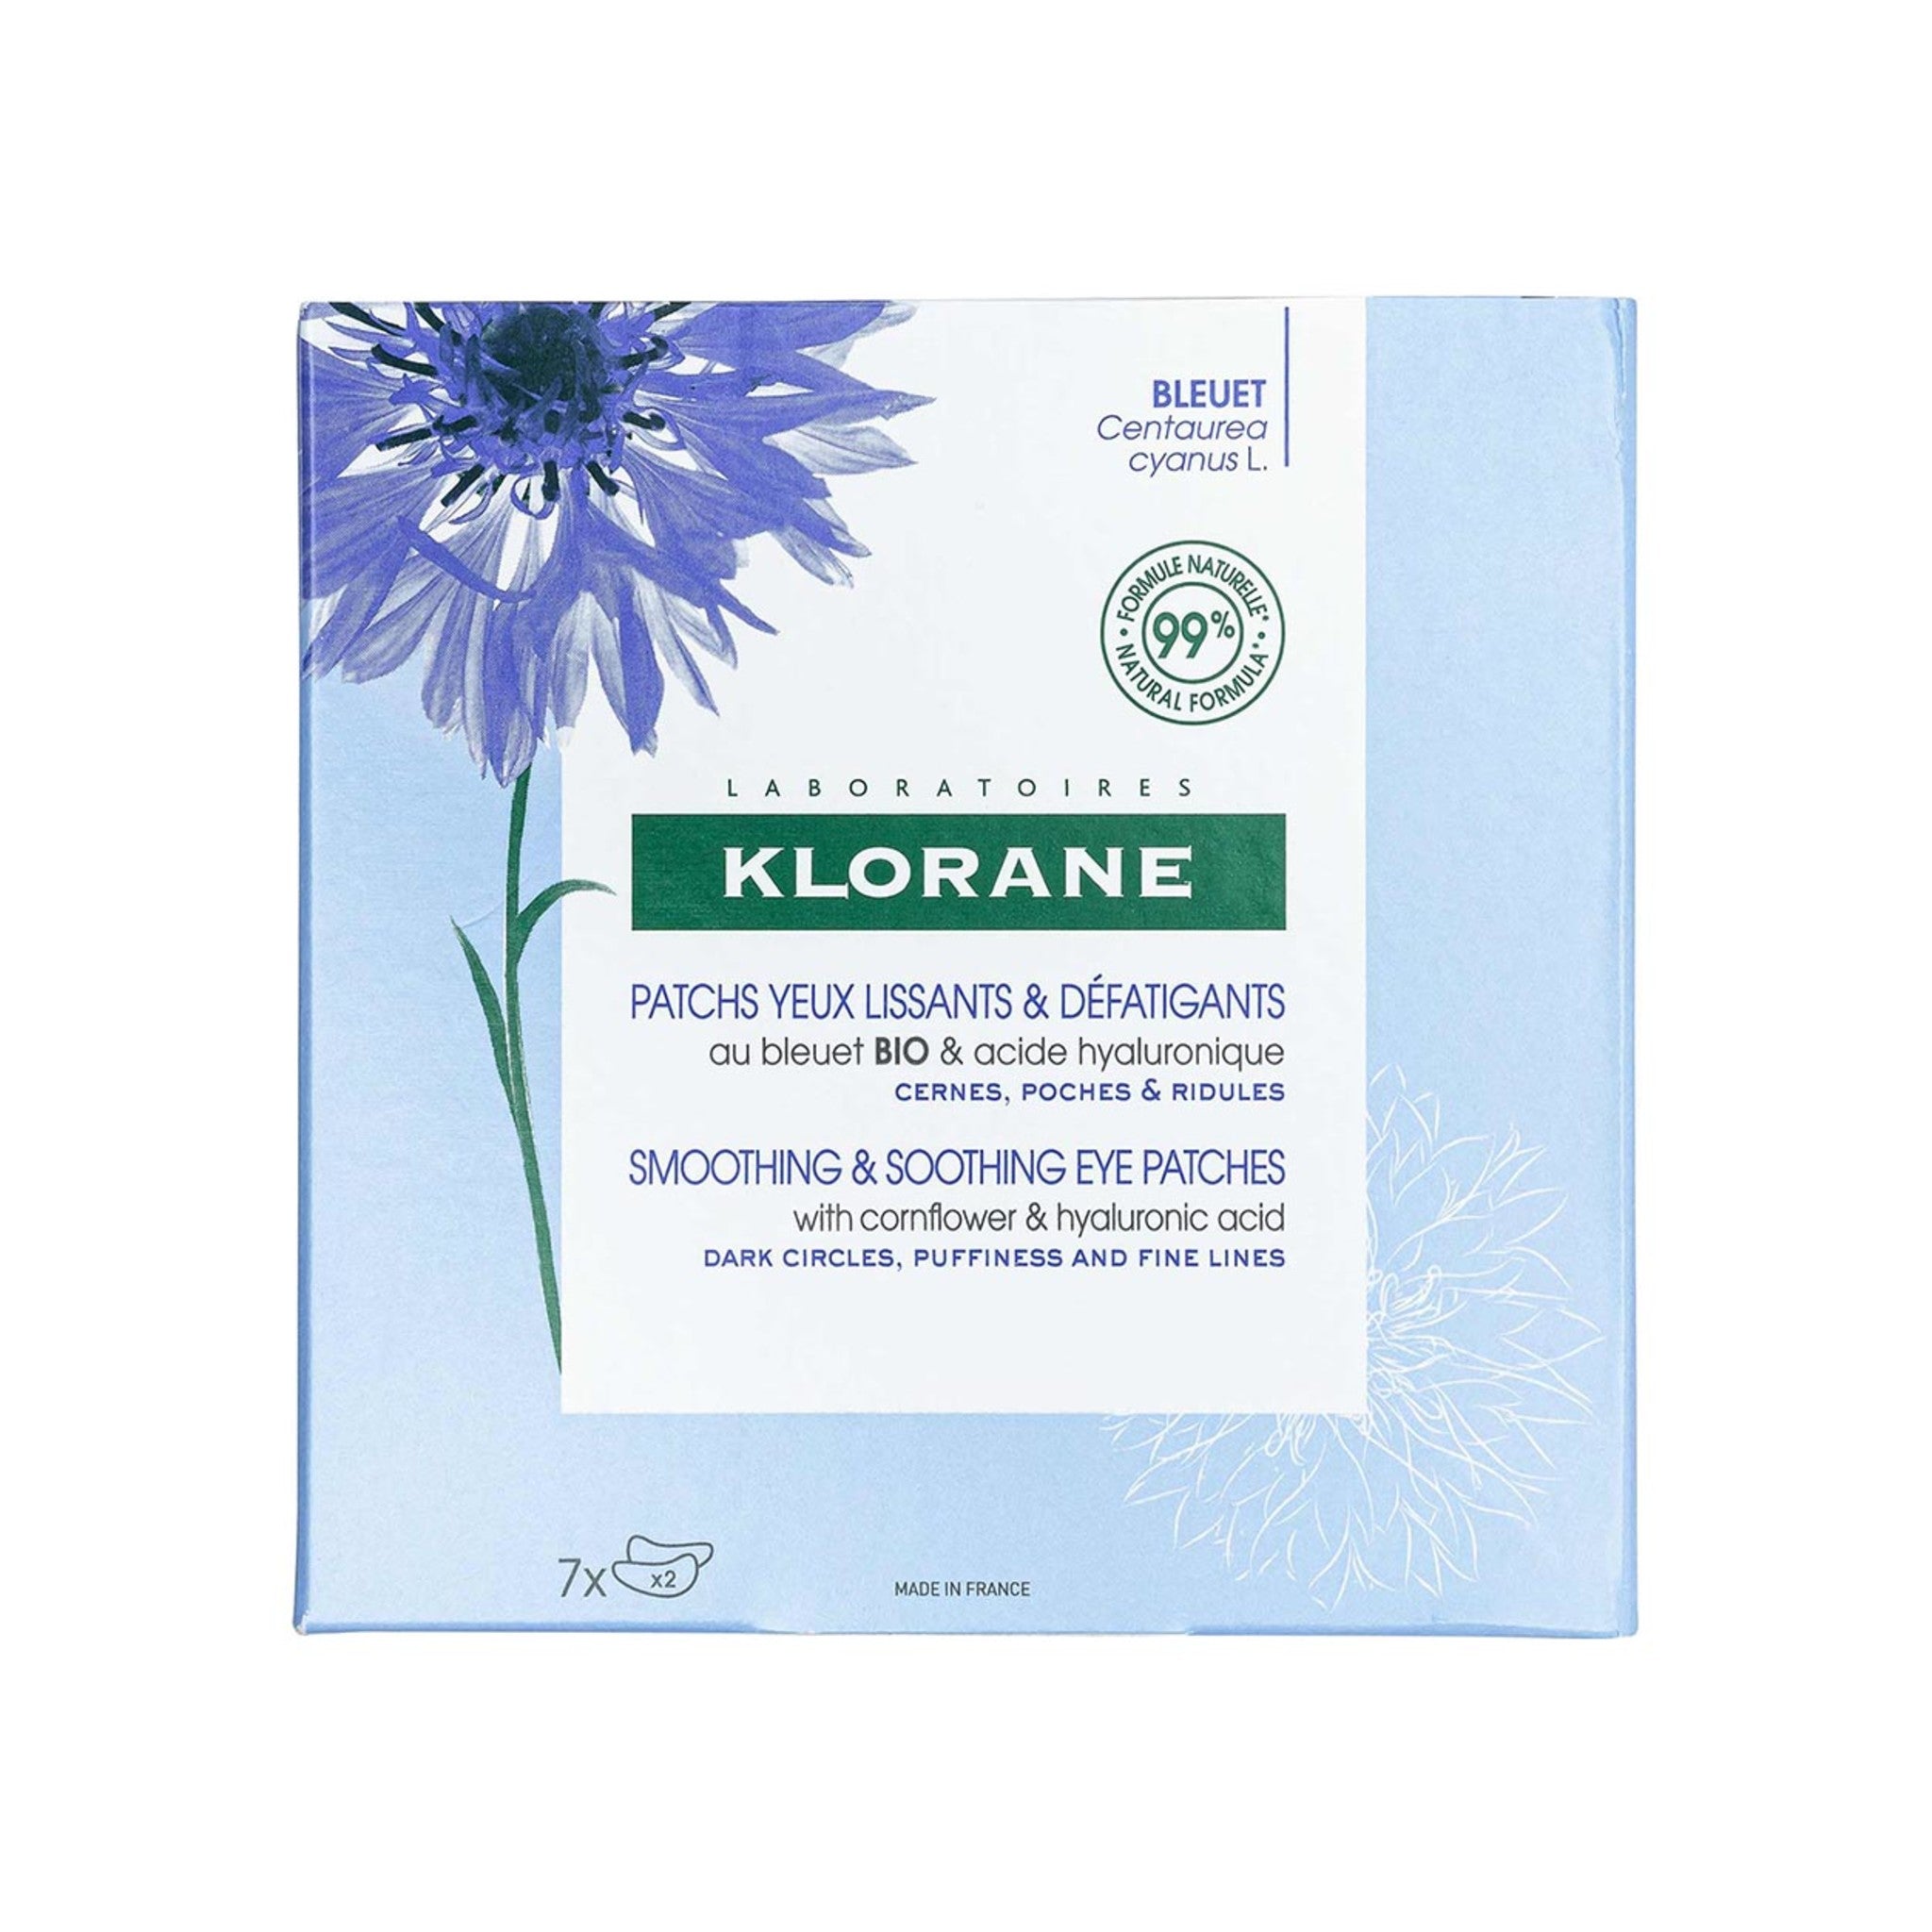 Klorane Smoothing and Soothing Eye Patches With Cornflower and Hyaluronic Acid main image.